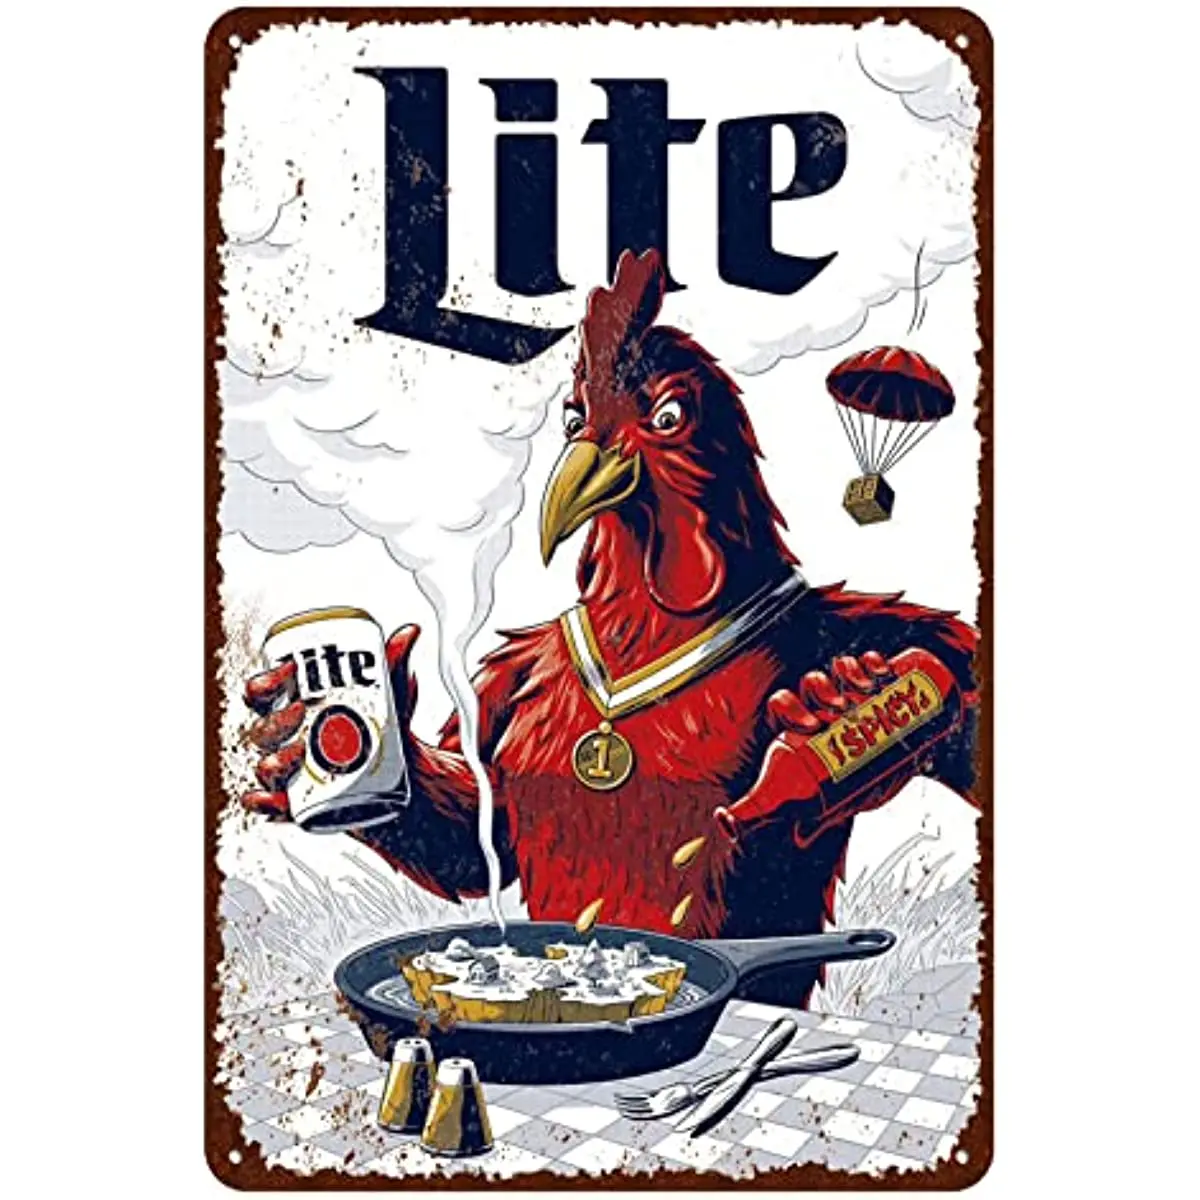 

New Vintage Beer Signs Bar Tin Sign Retro Metal Sign Wall Decor - Rooster home decor room decor wall decor